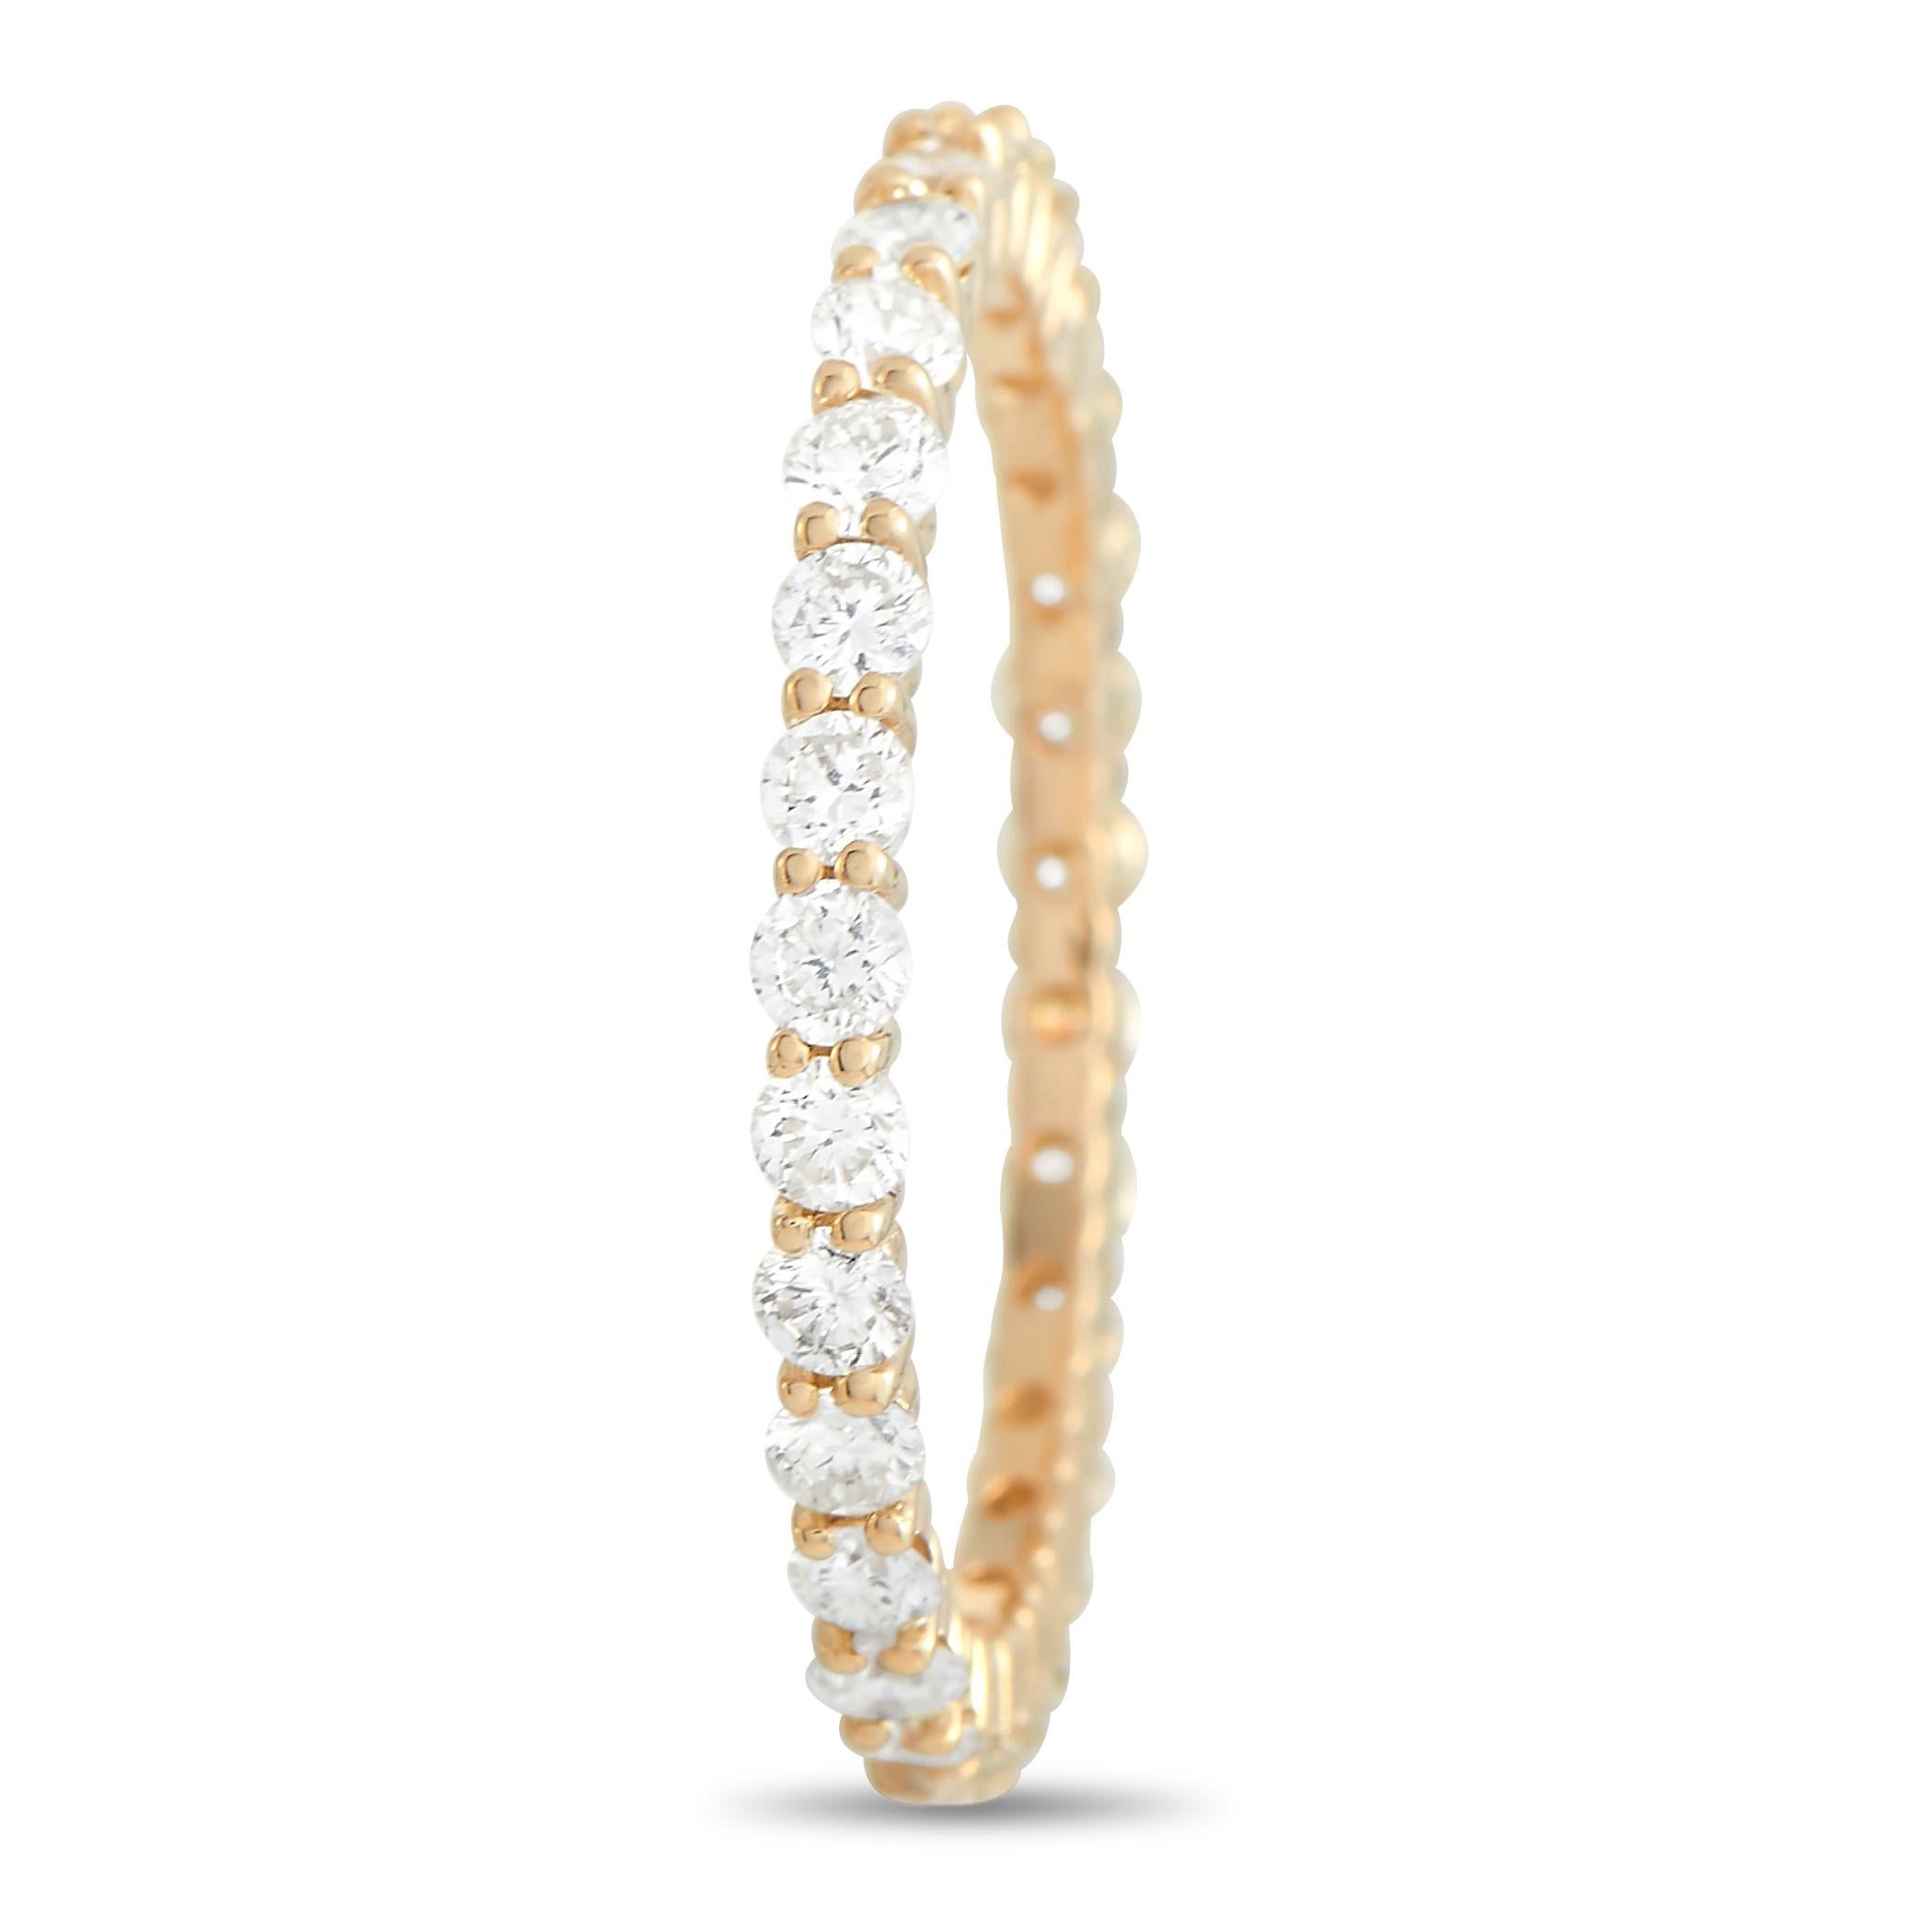 This stunning LB Exclusive 14K Yellow Gold 1.00 ct Diamond Infinity Ring is made with 14K yellow gold and has a single row of round-cut diamonds totaling 1.00 carats encircling the band, each held in place by four small prongs. The ring has a band